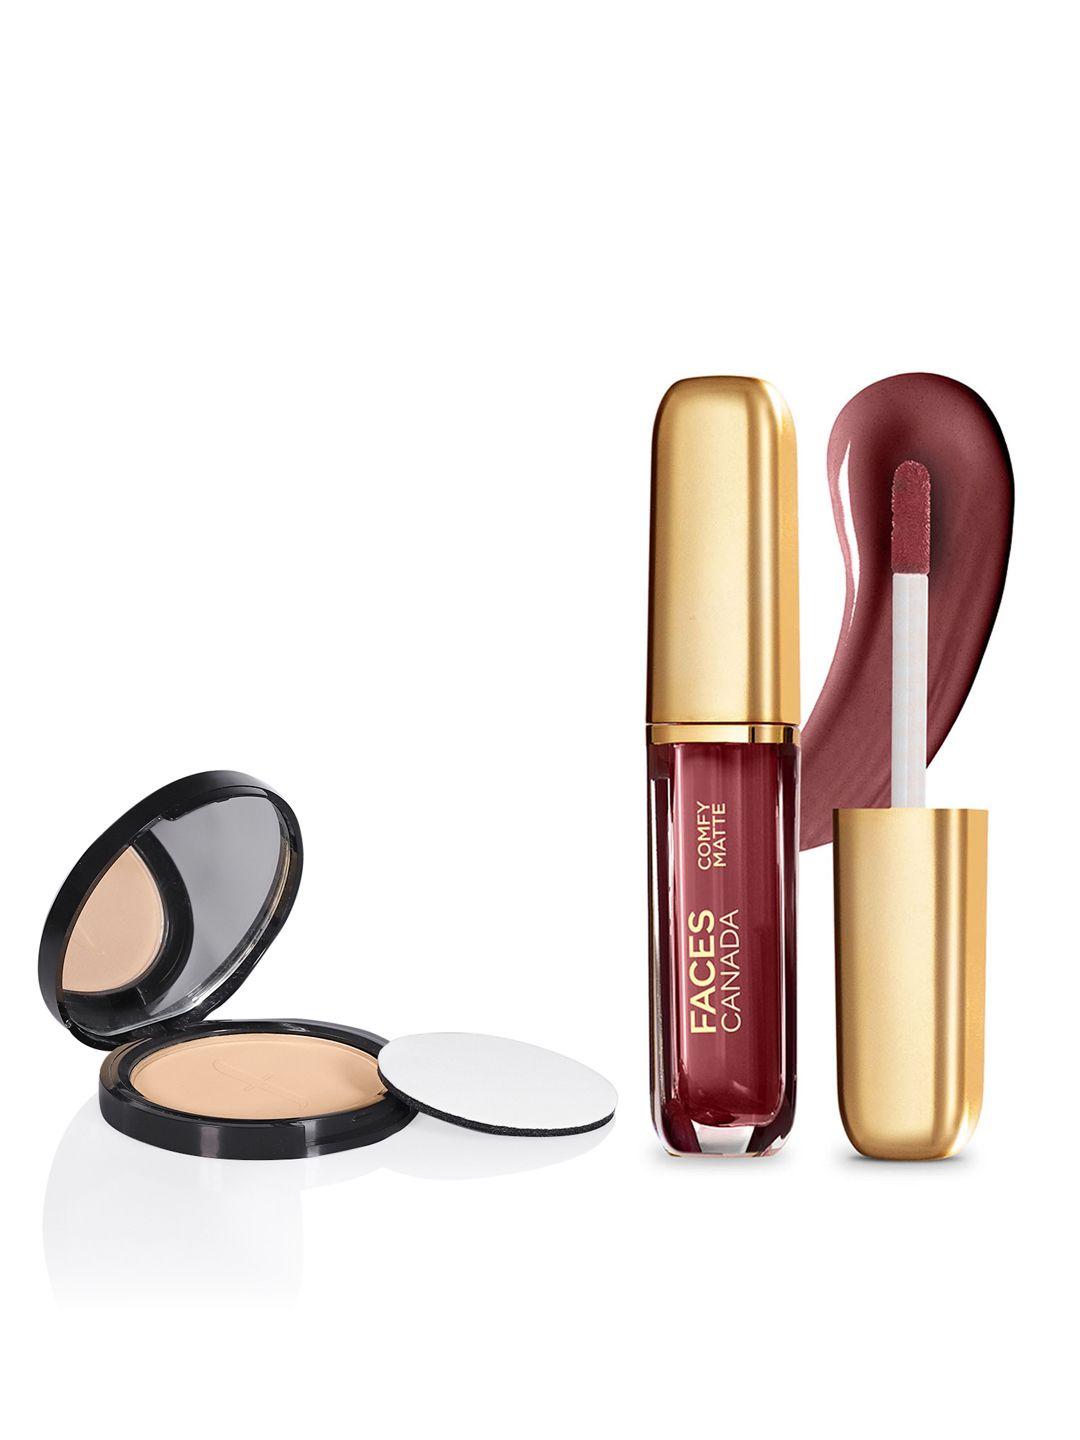 faces canada weightless stay matte compact-natural + comfy matte lip color-note to self